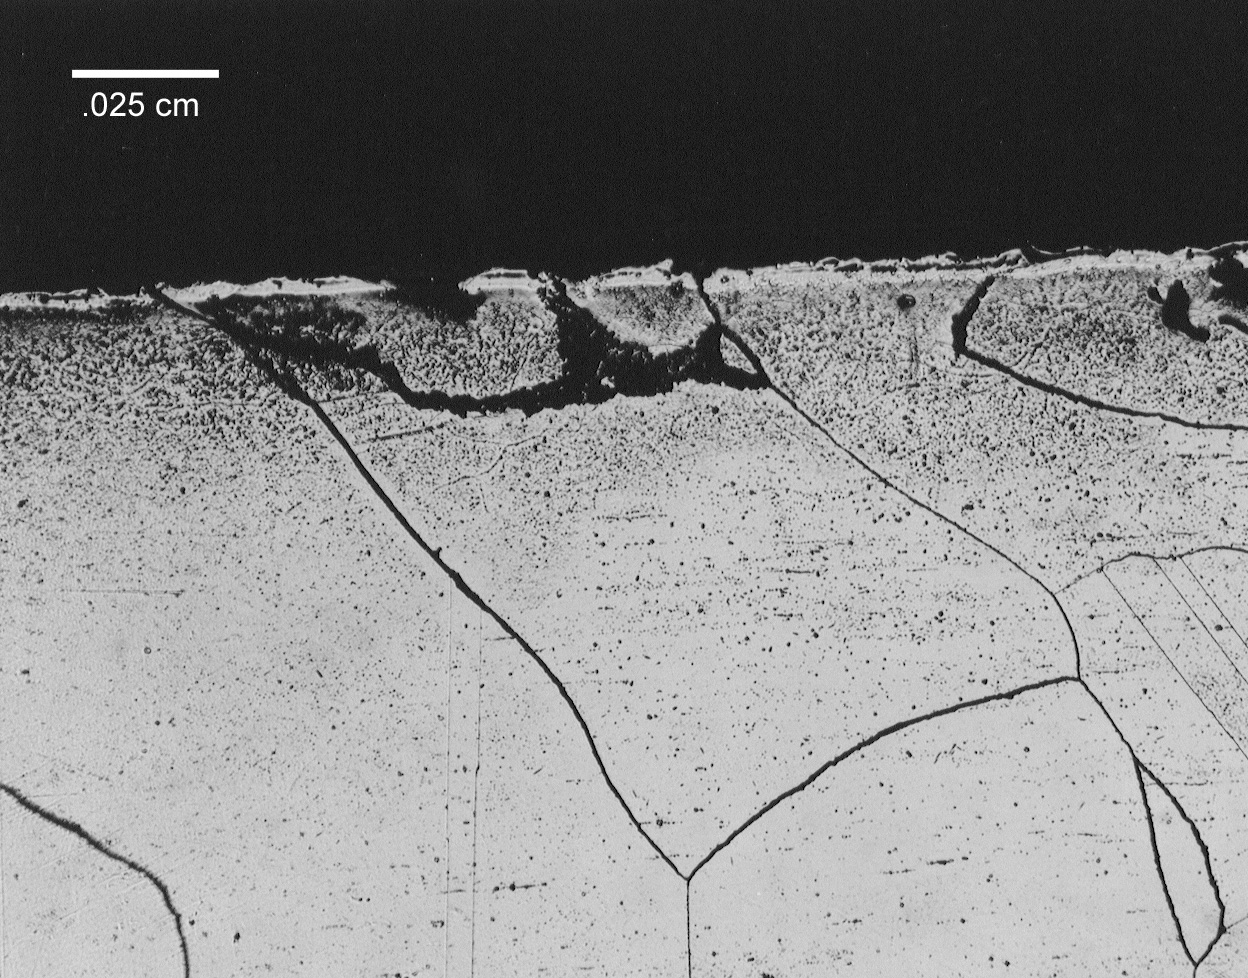 Figure 6b. Photomicrographs of specimen sectioned from melted end on 690 electrode sheath. Extremely large grains in excess of 0.13 cm were common in this region.